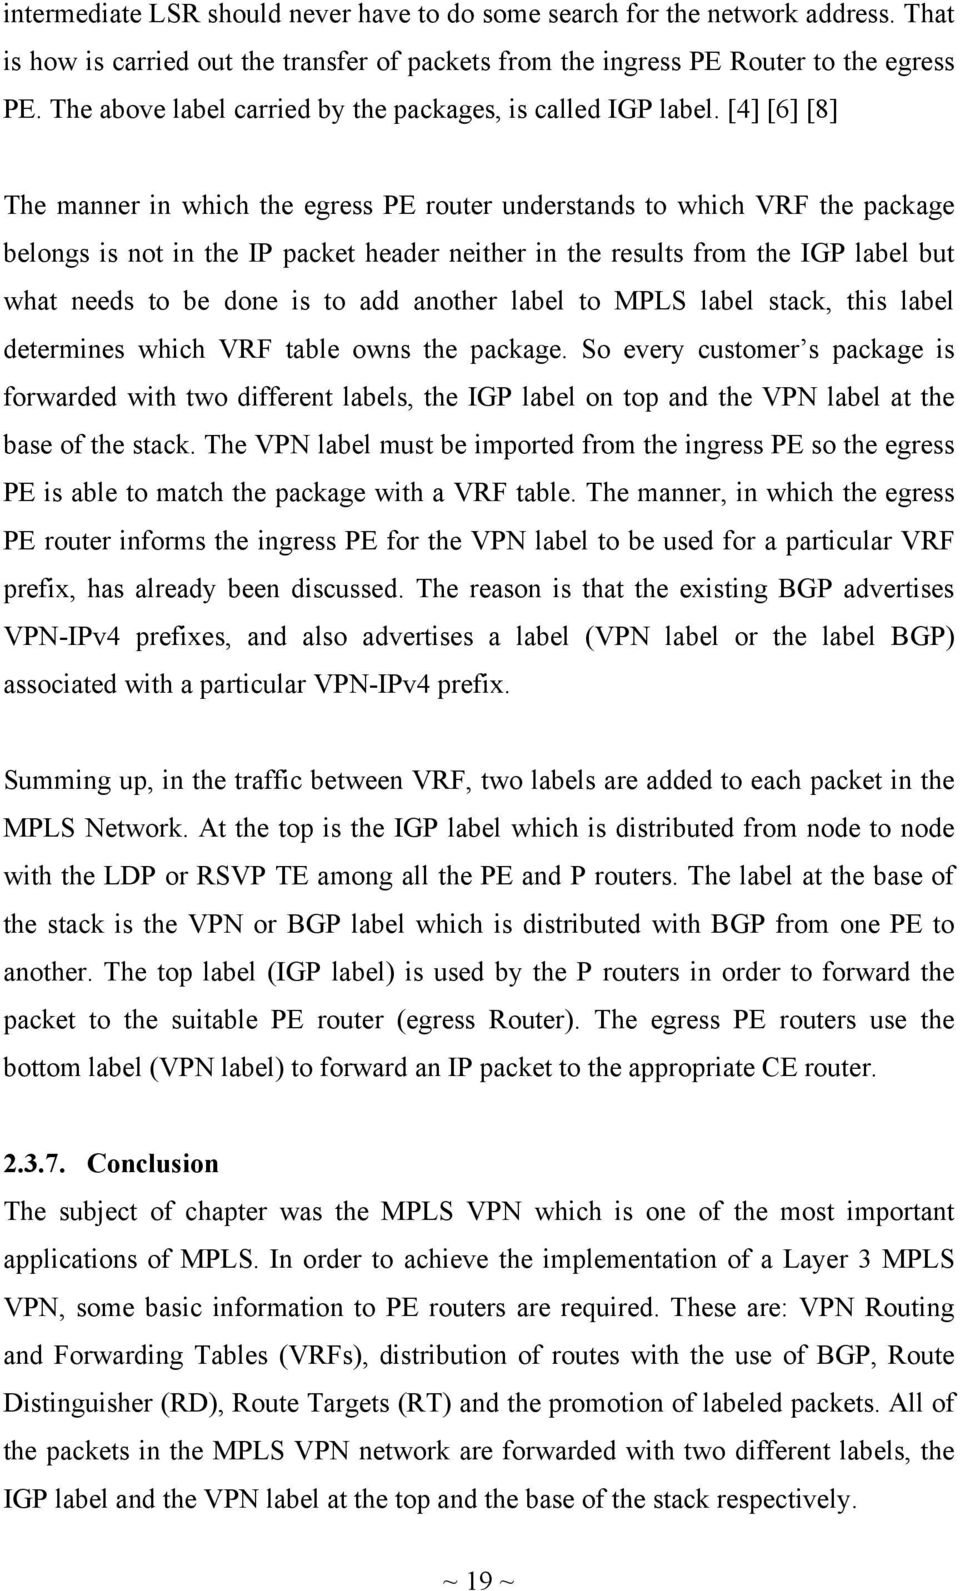 [4] [6] [8] The manner in which the egress PE router understands to which VRF the package belongs is not in the IP packet header neither in the results from the IGP label but what needs to be done is